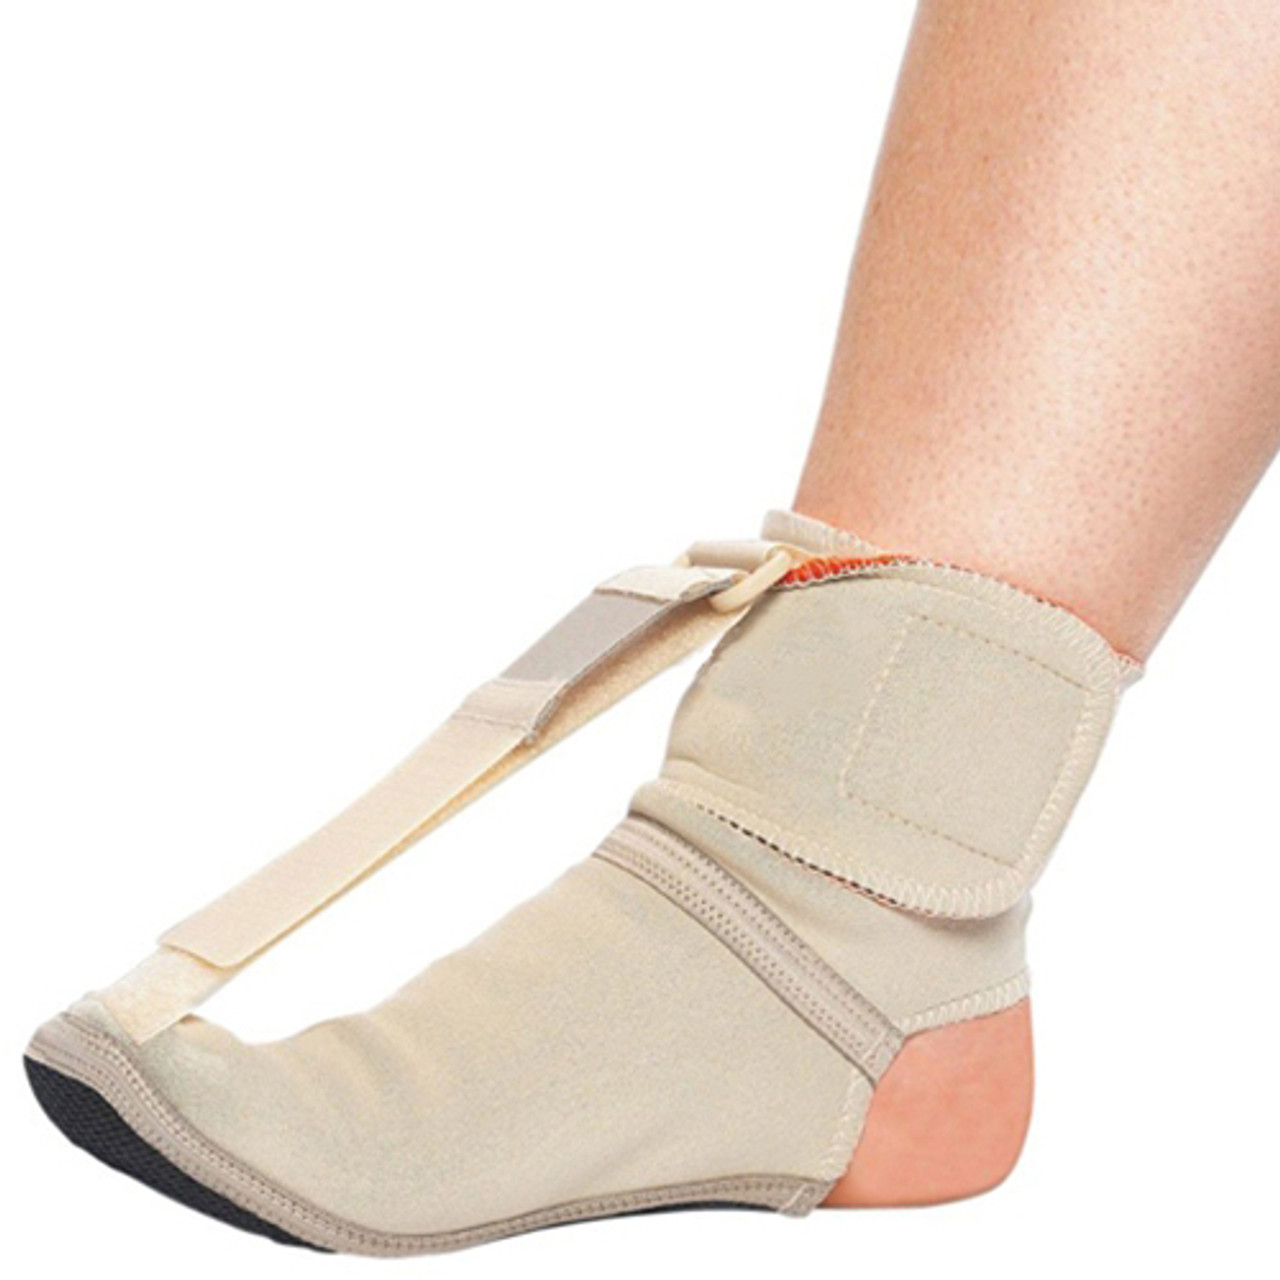  Plantar Fasciitis Night Splint Sock: Gentle Support for Plantar  Fascia, Relief from Heel Pain, Achilles Tendonitis, Foot Drop - Soft Stretch  and Comfortable Brace for Sleeping, Men and Women (Small) 